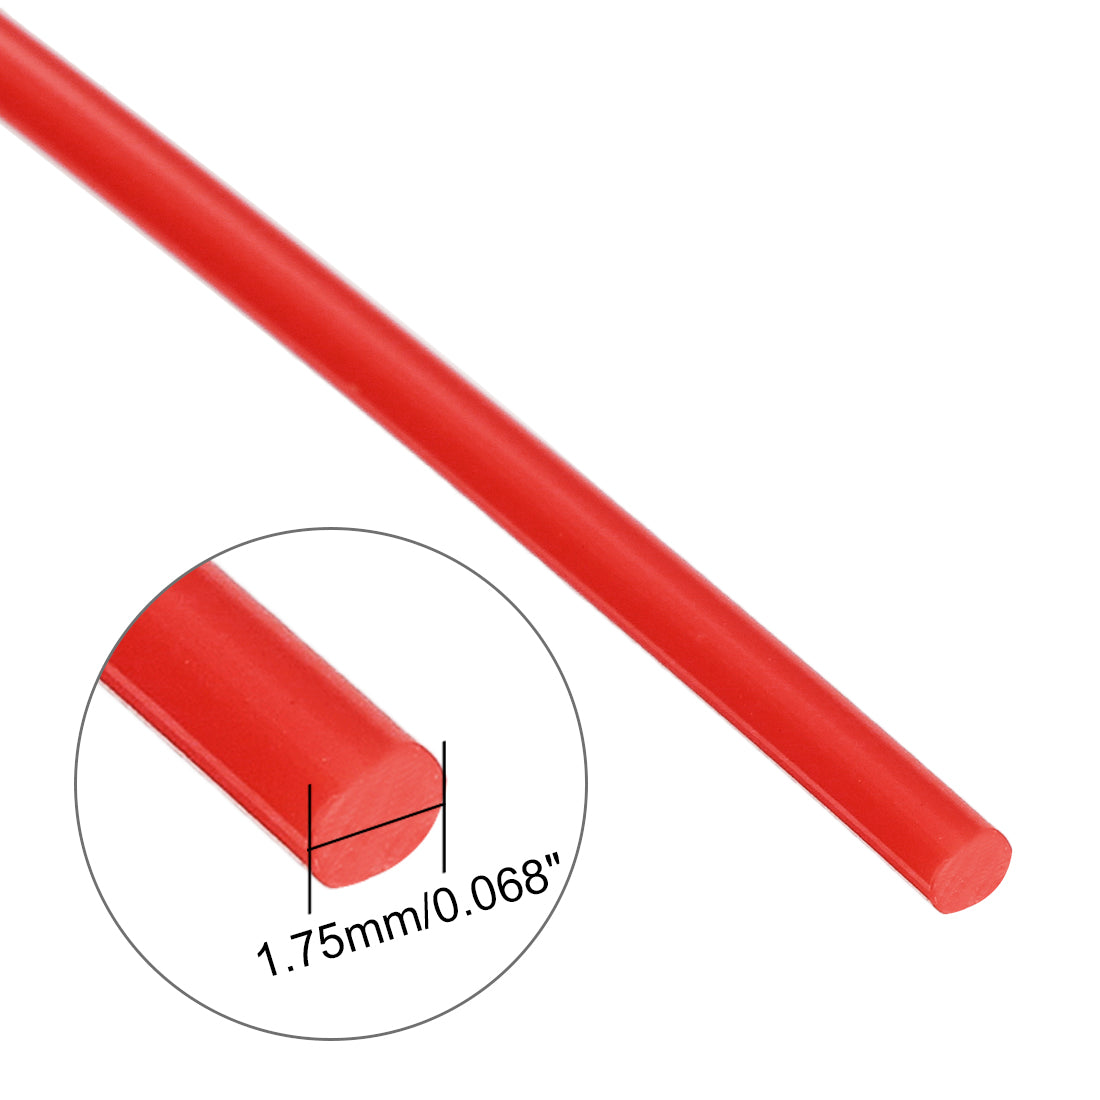 uxcell Uxcell 3D Printer Pen Filament Refills, 32.8Ft Length, 1.75 mm Dia, PLA, Dimensional Accuracy +/- 0.02mm, for 3D Painting and Drawing,Red